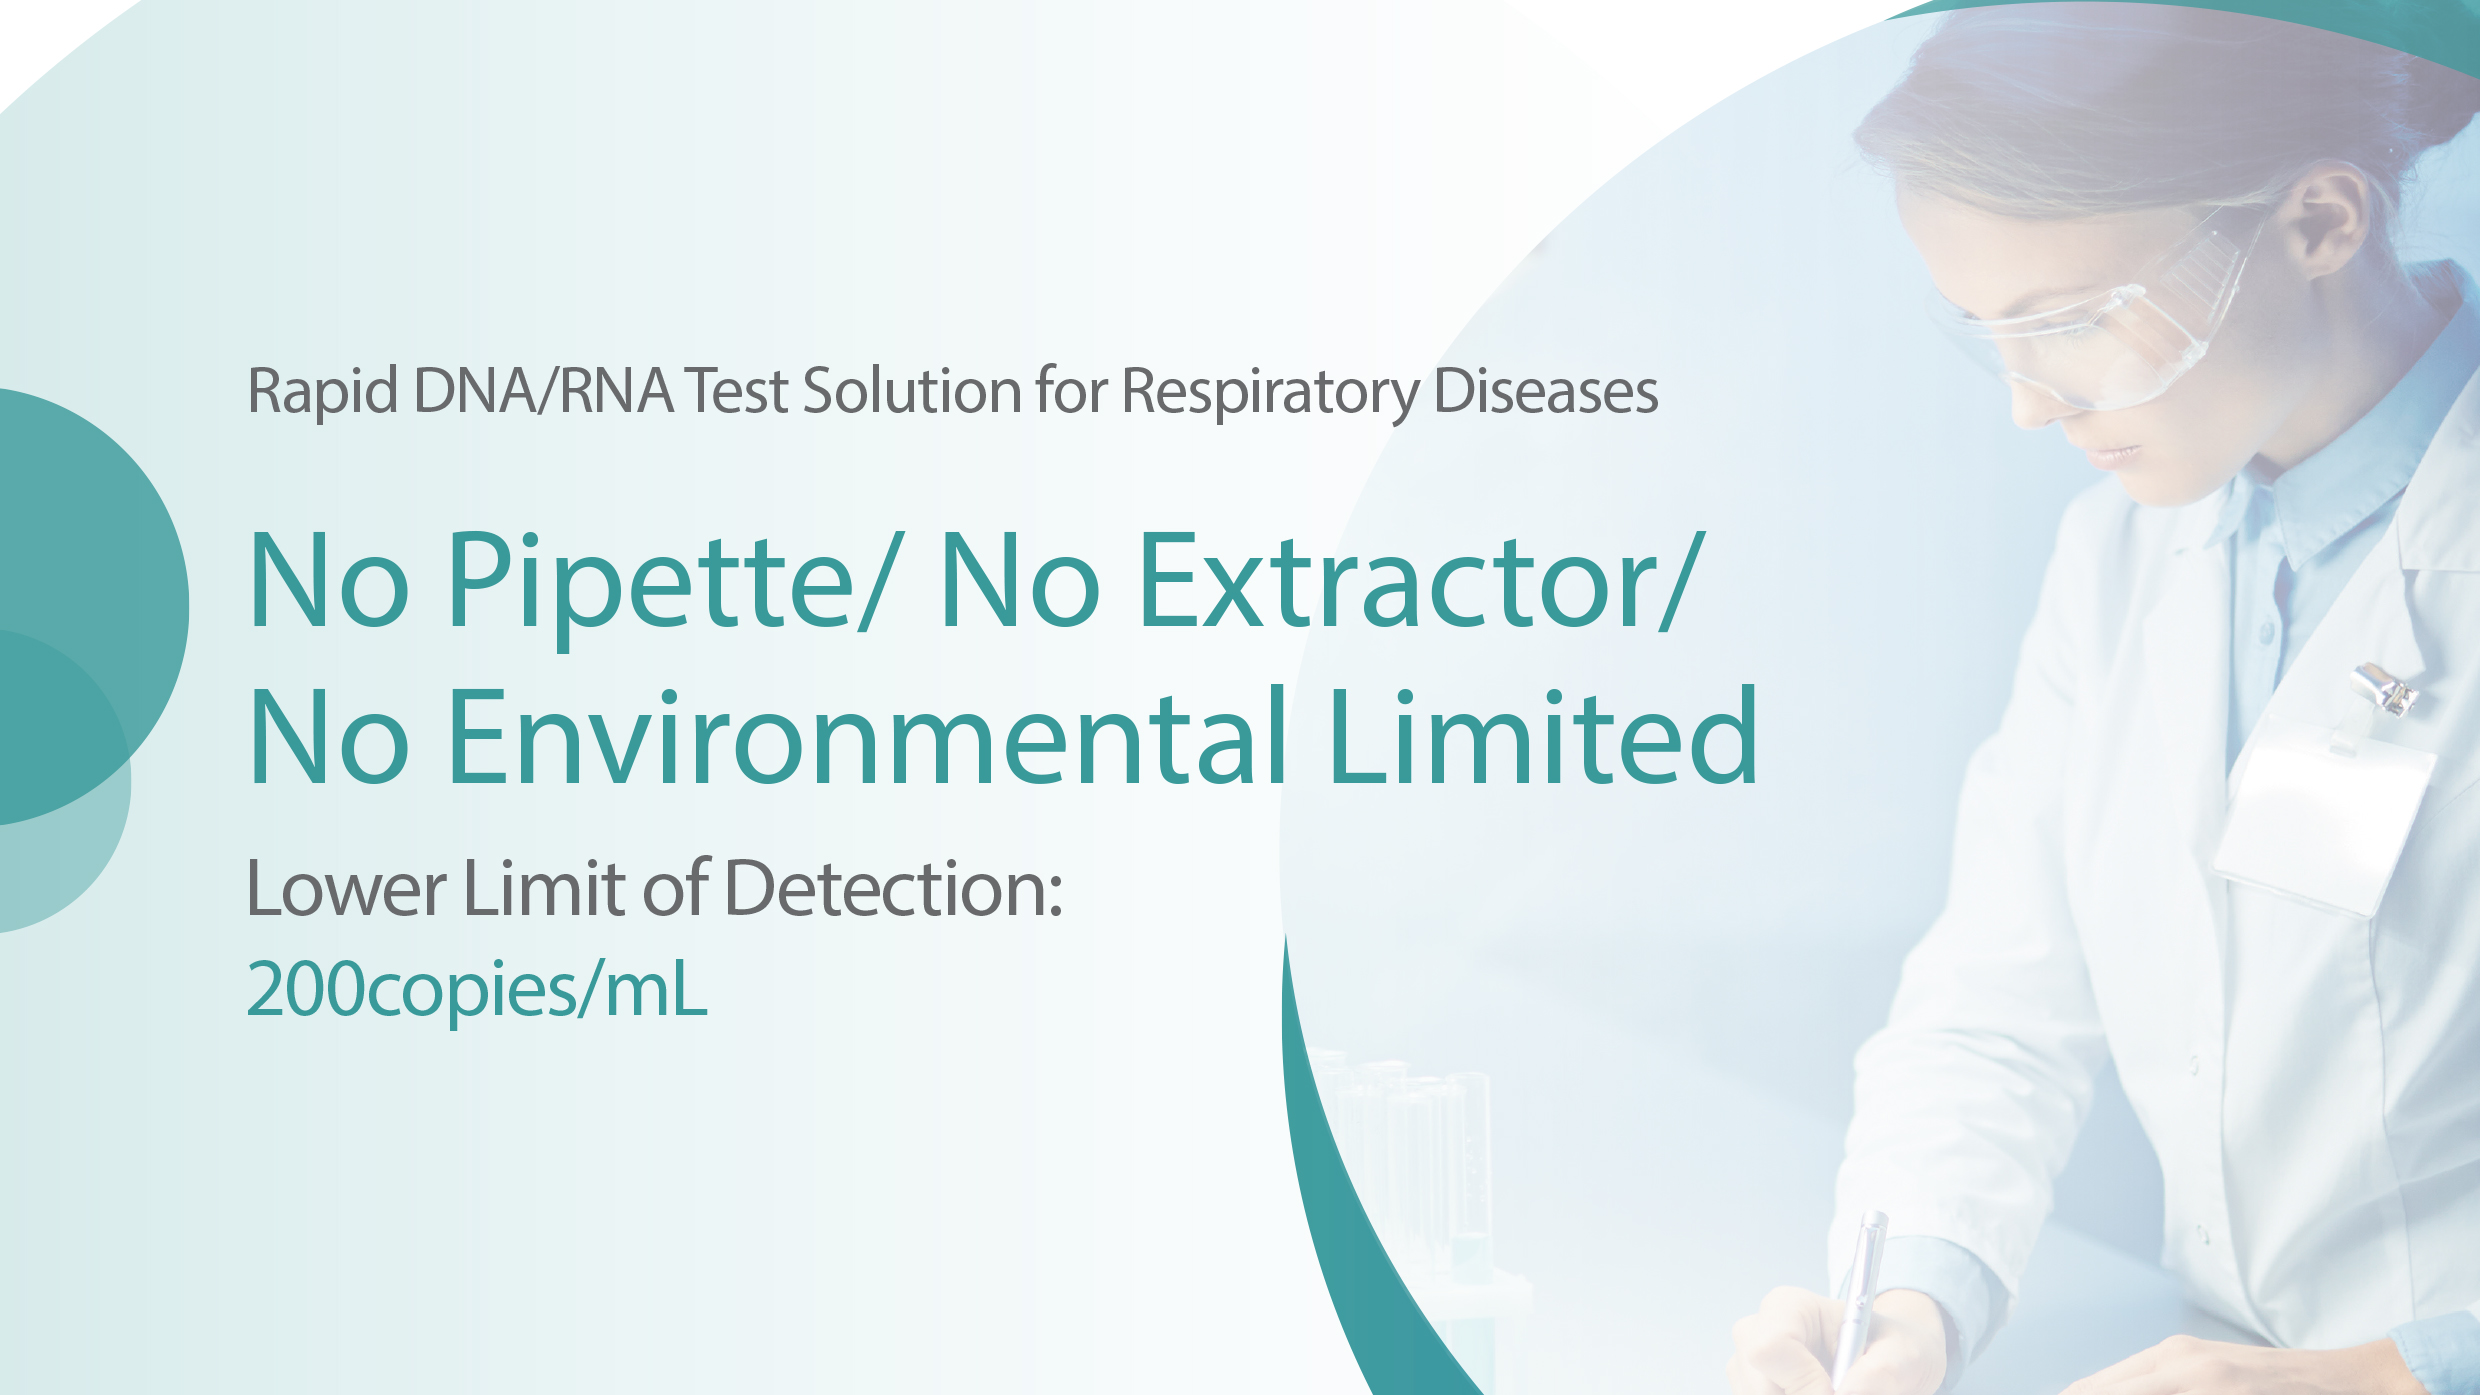 Rapid DNA/RNA Test Solution for Respiratory Diseases